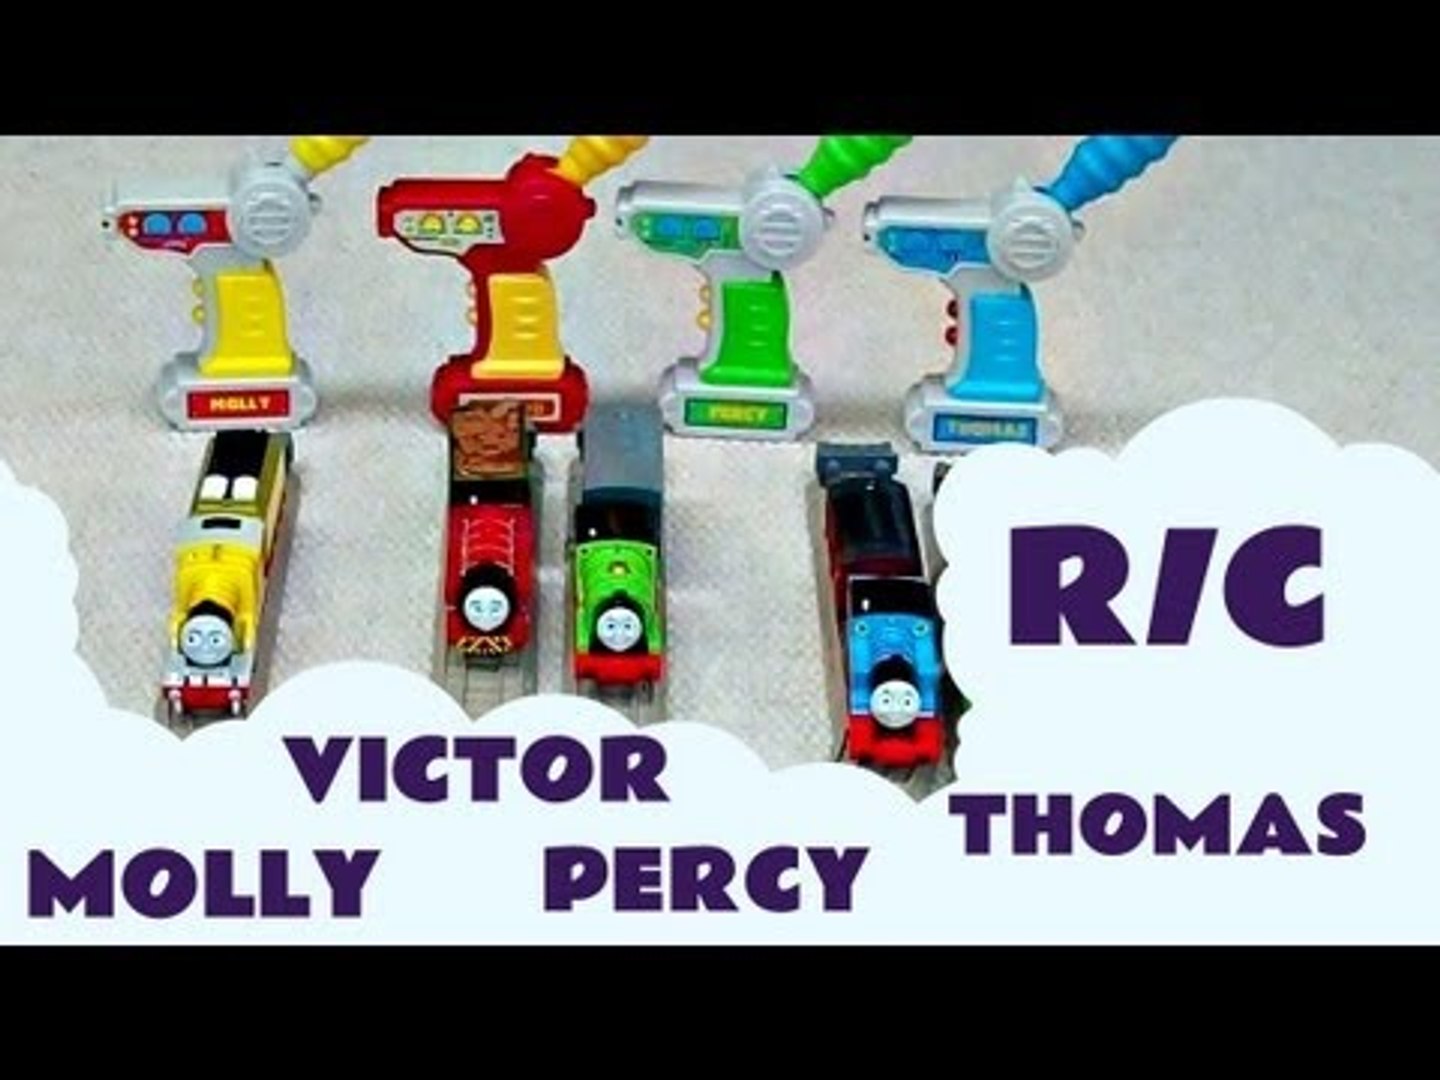 4 Trackmaster Remote Control Thomas And Friends Trains Victor Percy Molly  Kids Toy Train Set - video Dailymotion